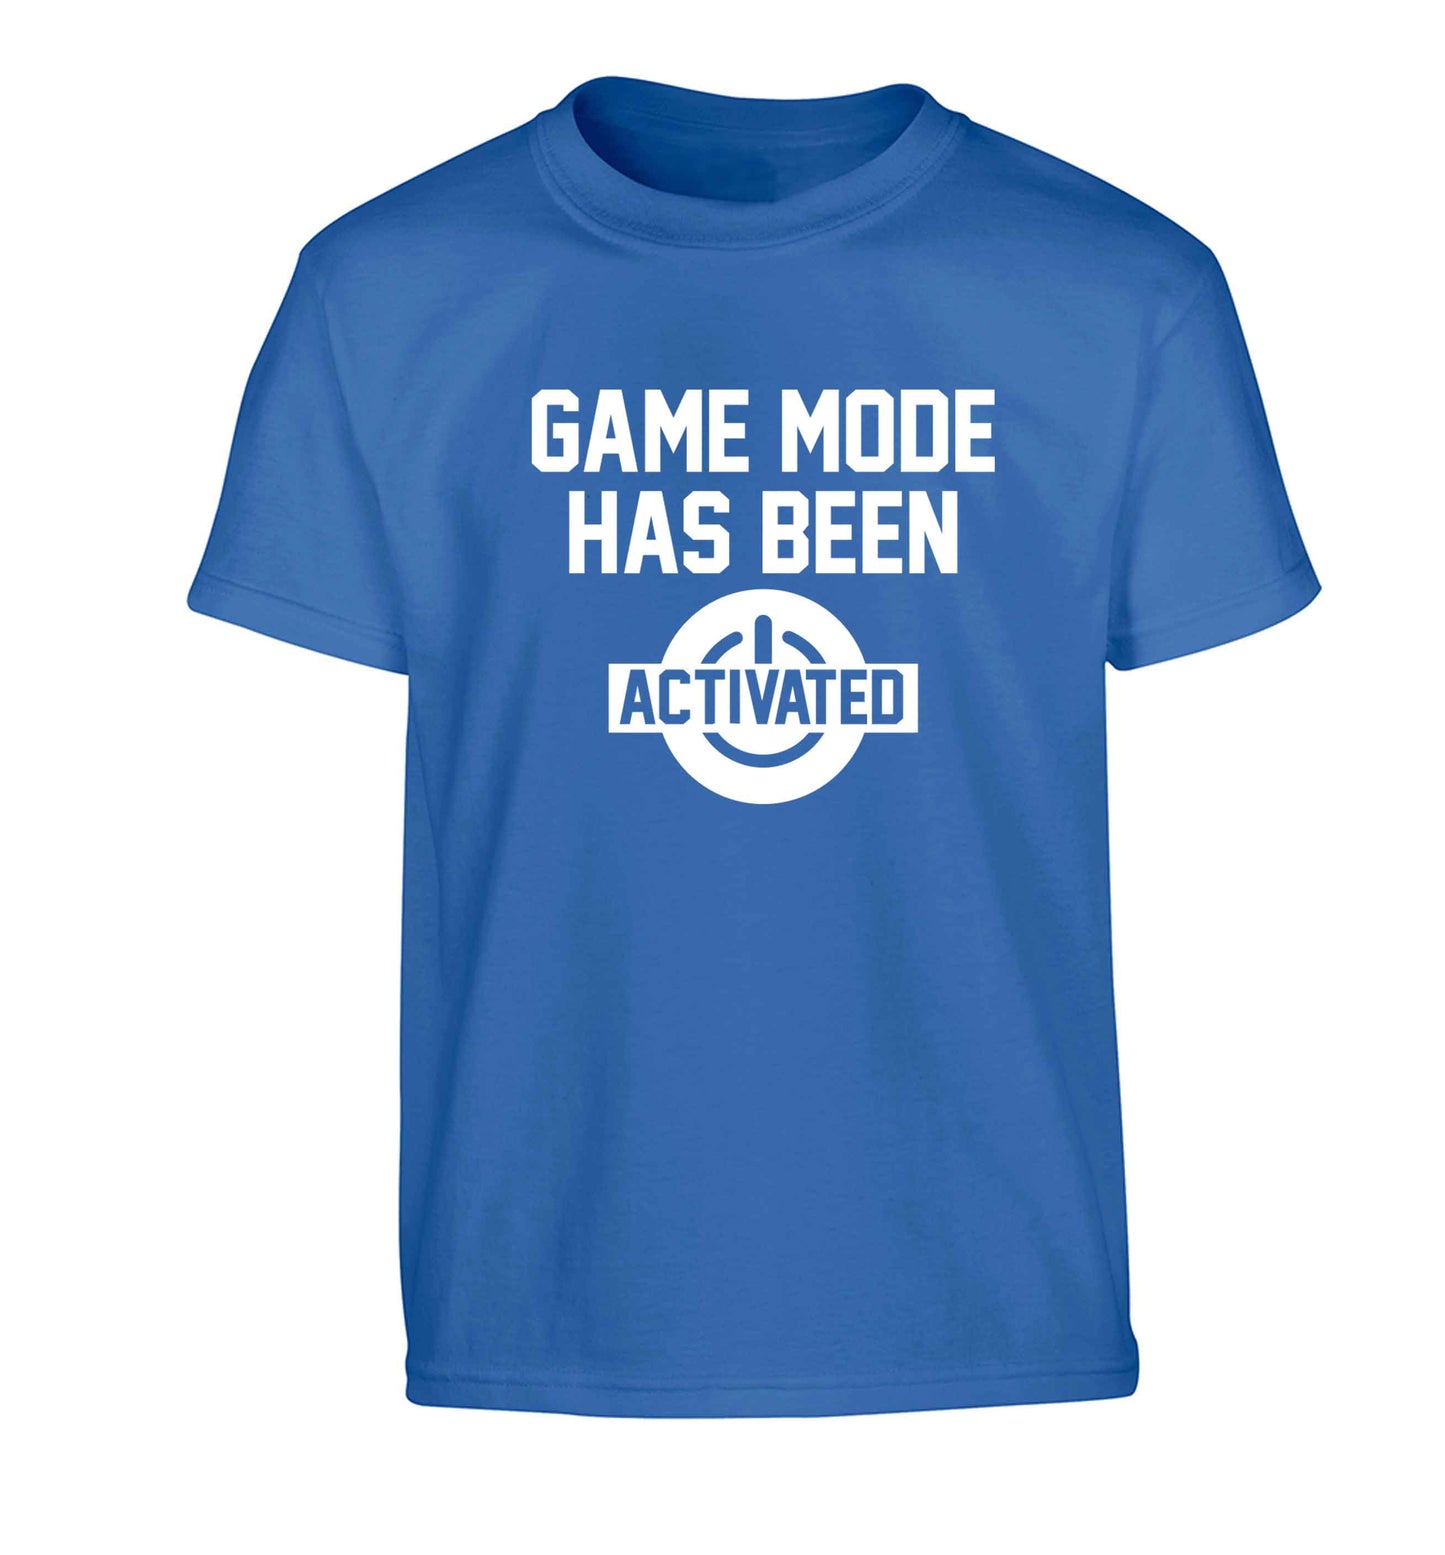 Game mode has been activated Children's blue Tshirt 12-13 Years